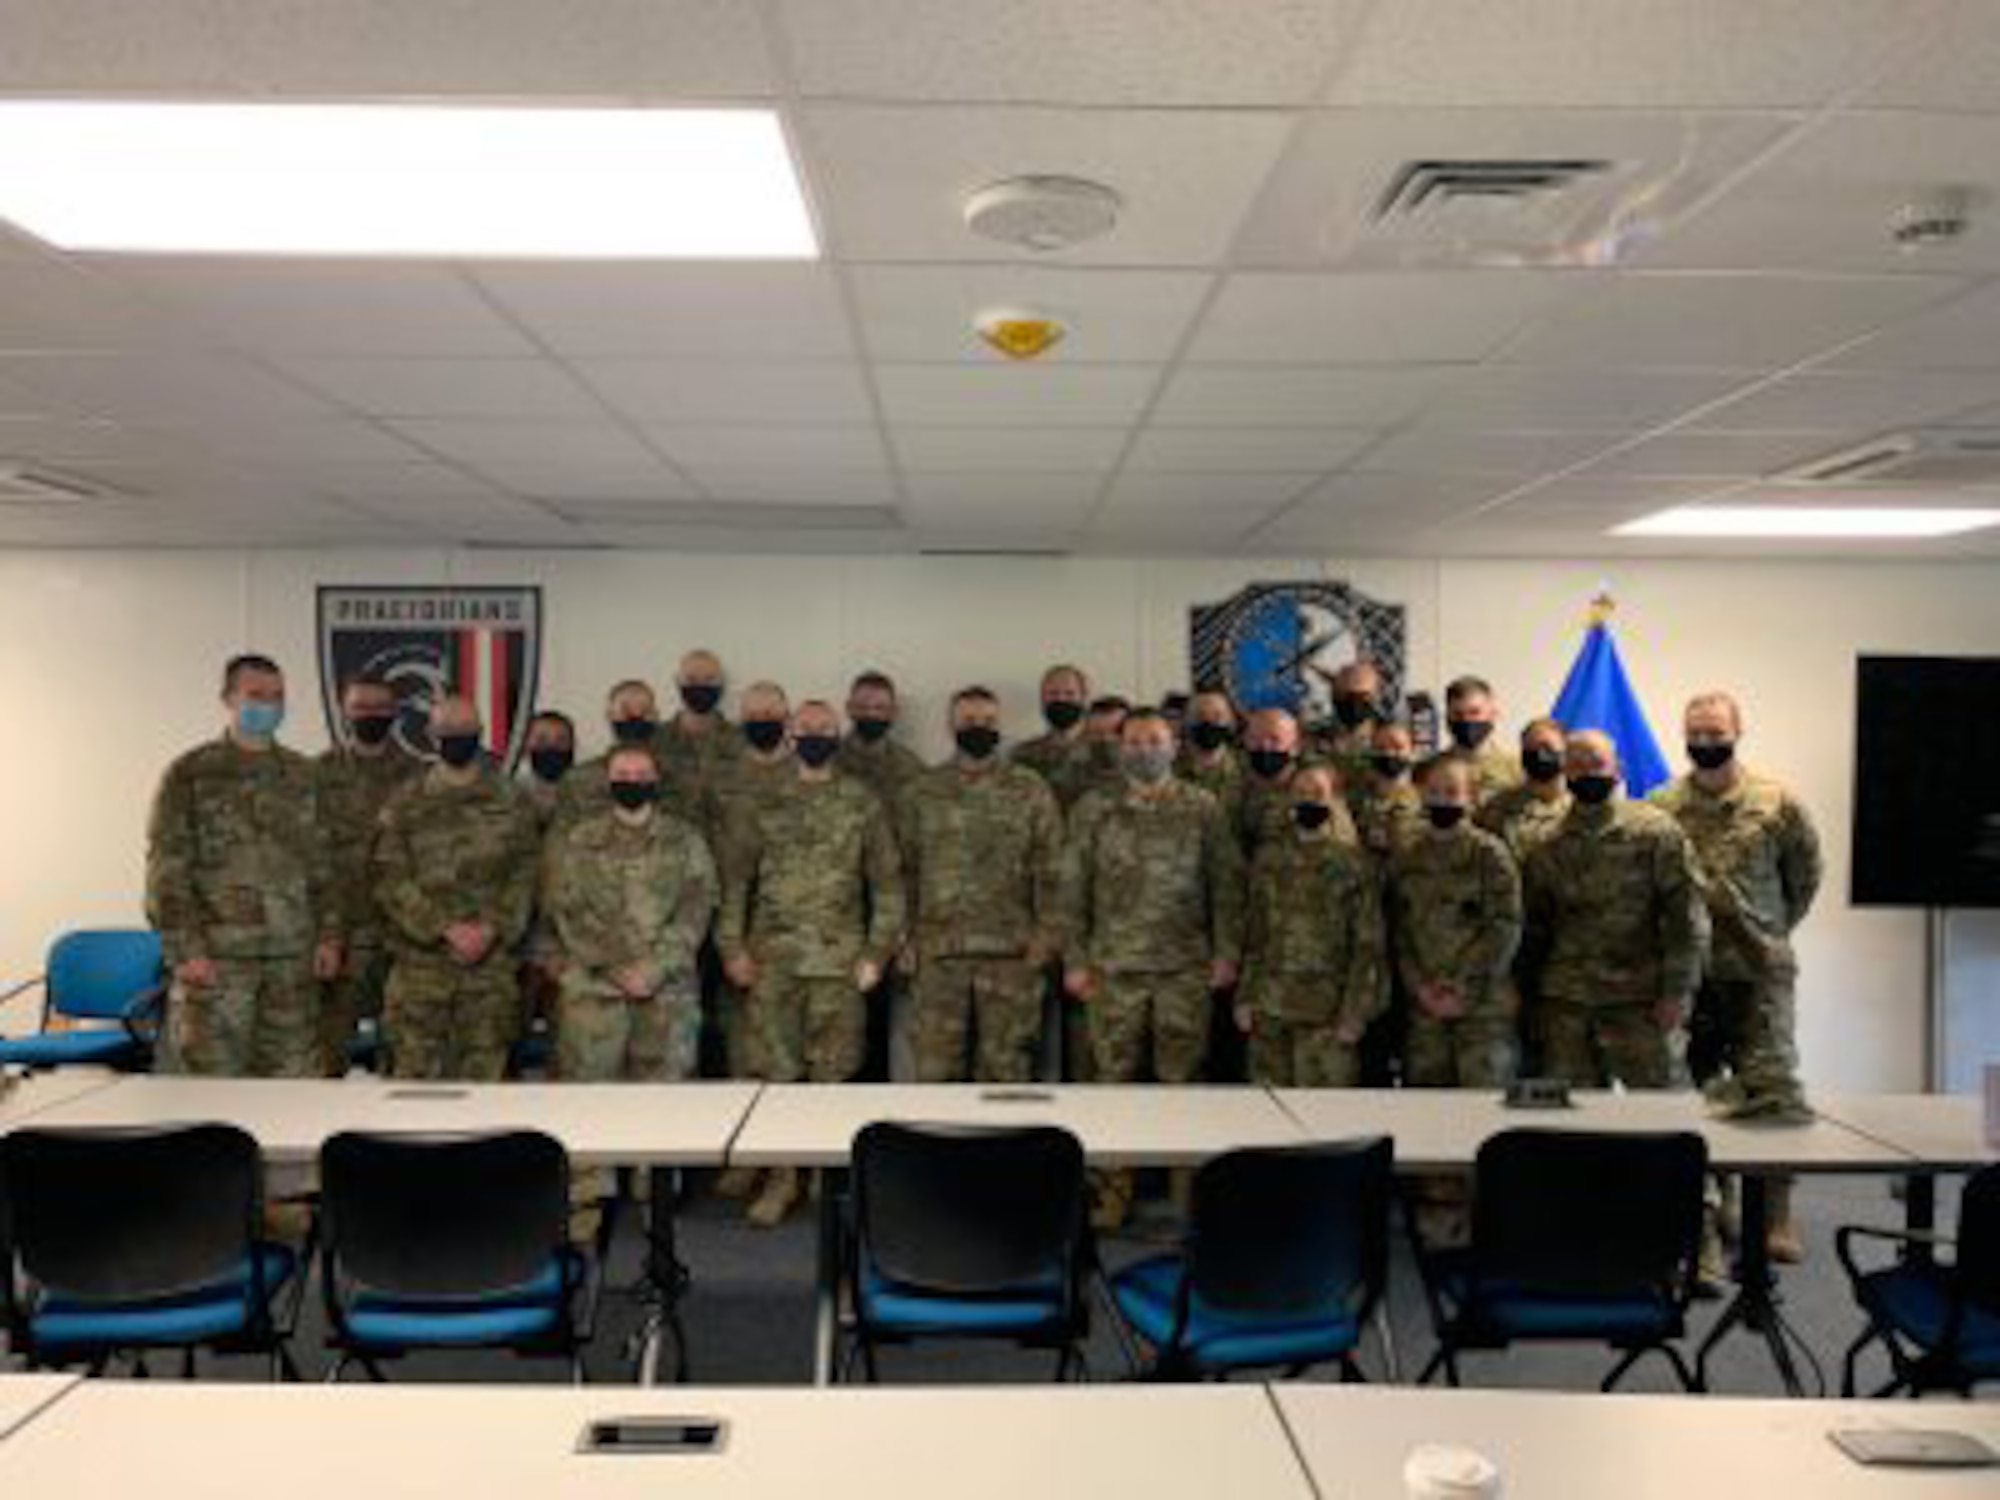 Soldiers of the Wisconsin Army National Guard’s Detachment 1, 176th Cyber Protection Team, with Maj. Gen. Paul Knapp, Wisconsin’s adjutant general, following their external evaluation exercise prior to deploying. The team, which includes Soldiers from Minnesota, Illinois and Virginia, is in the midst of a mobilization to cyberspace operations in support of U.S. Cyber Command and Cyber National Mission Force requirements.